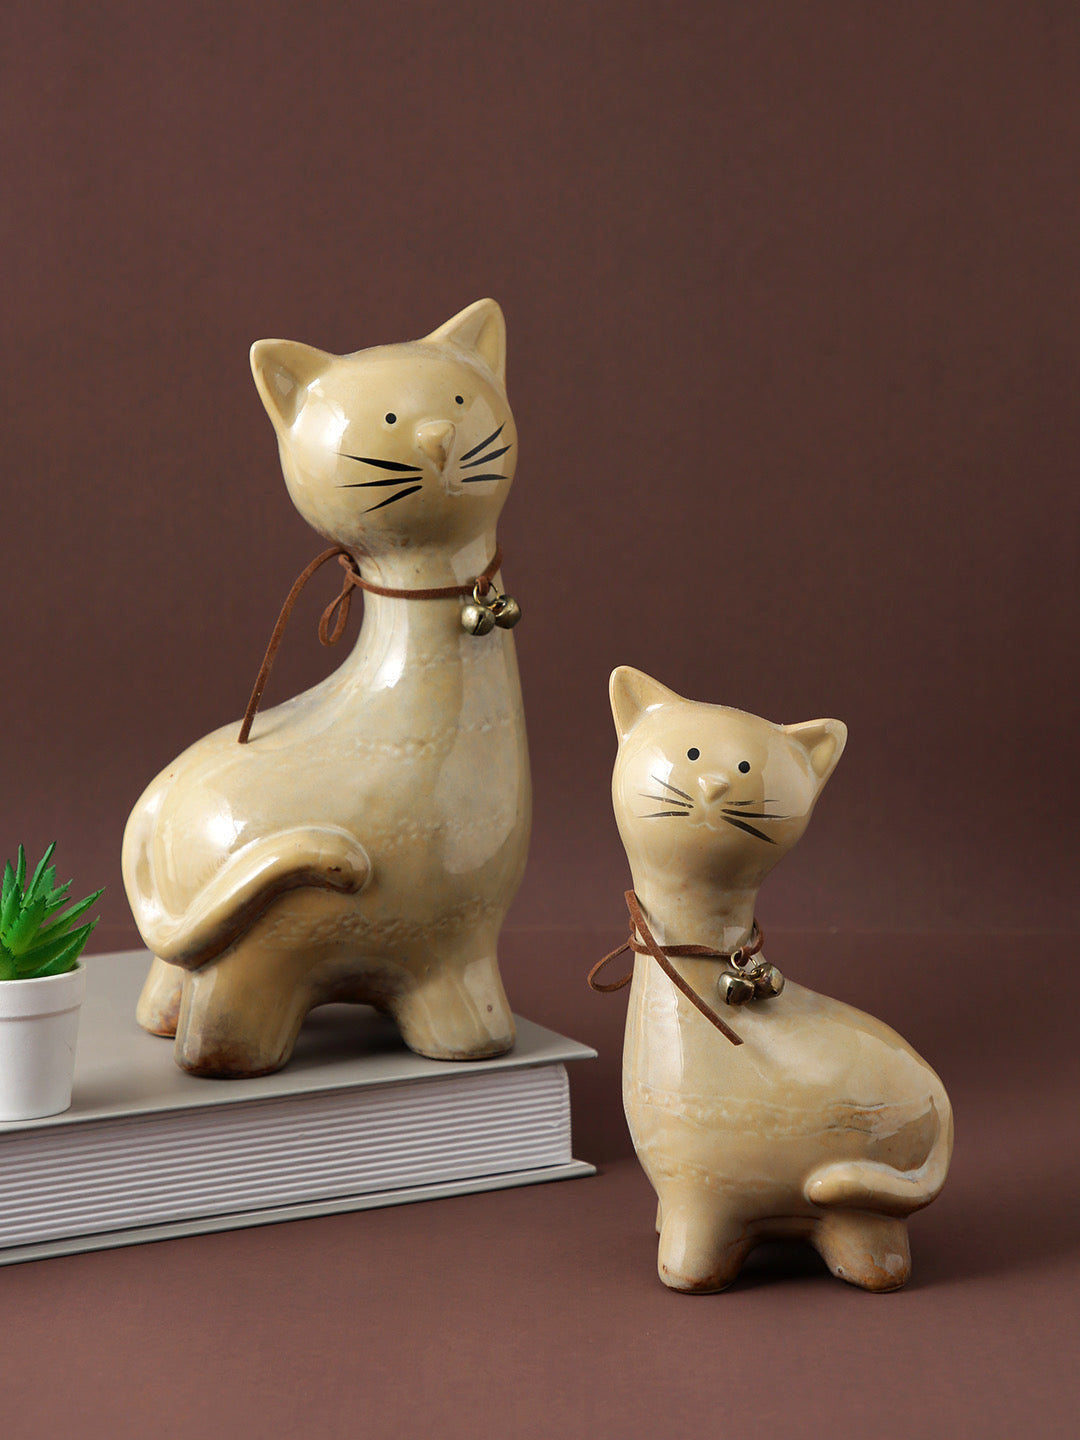 Pair of Cute Cats with Bell on Neck - Default Title (SHOWC22048_2)